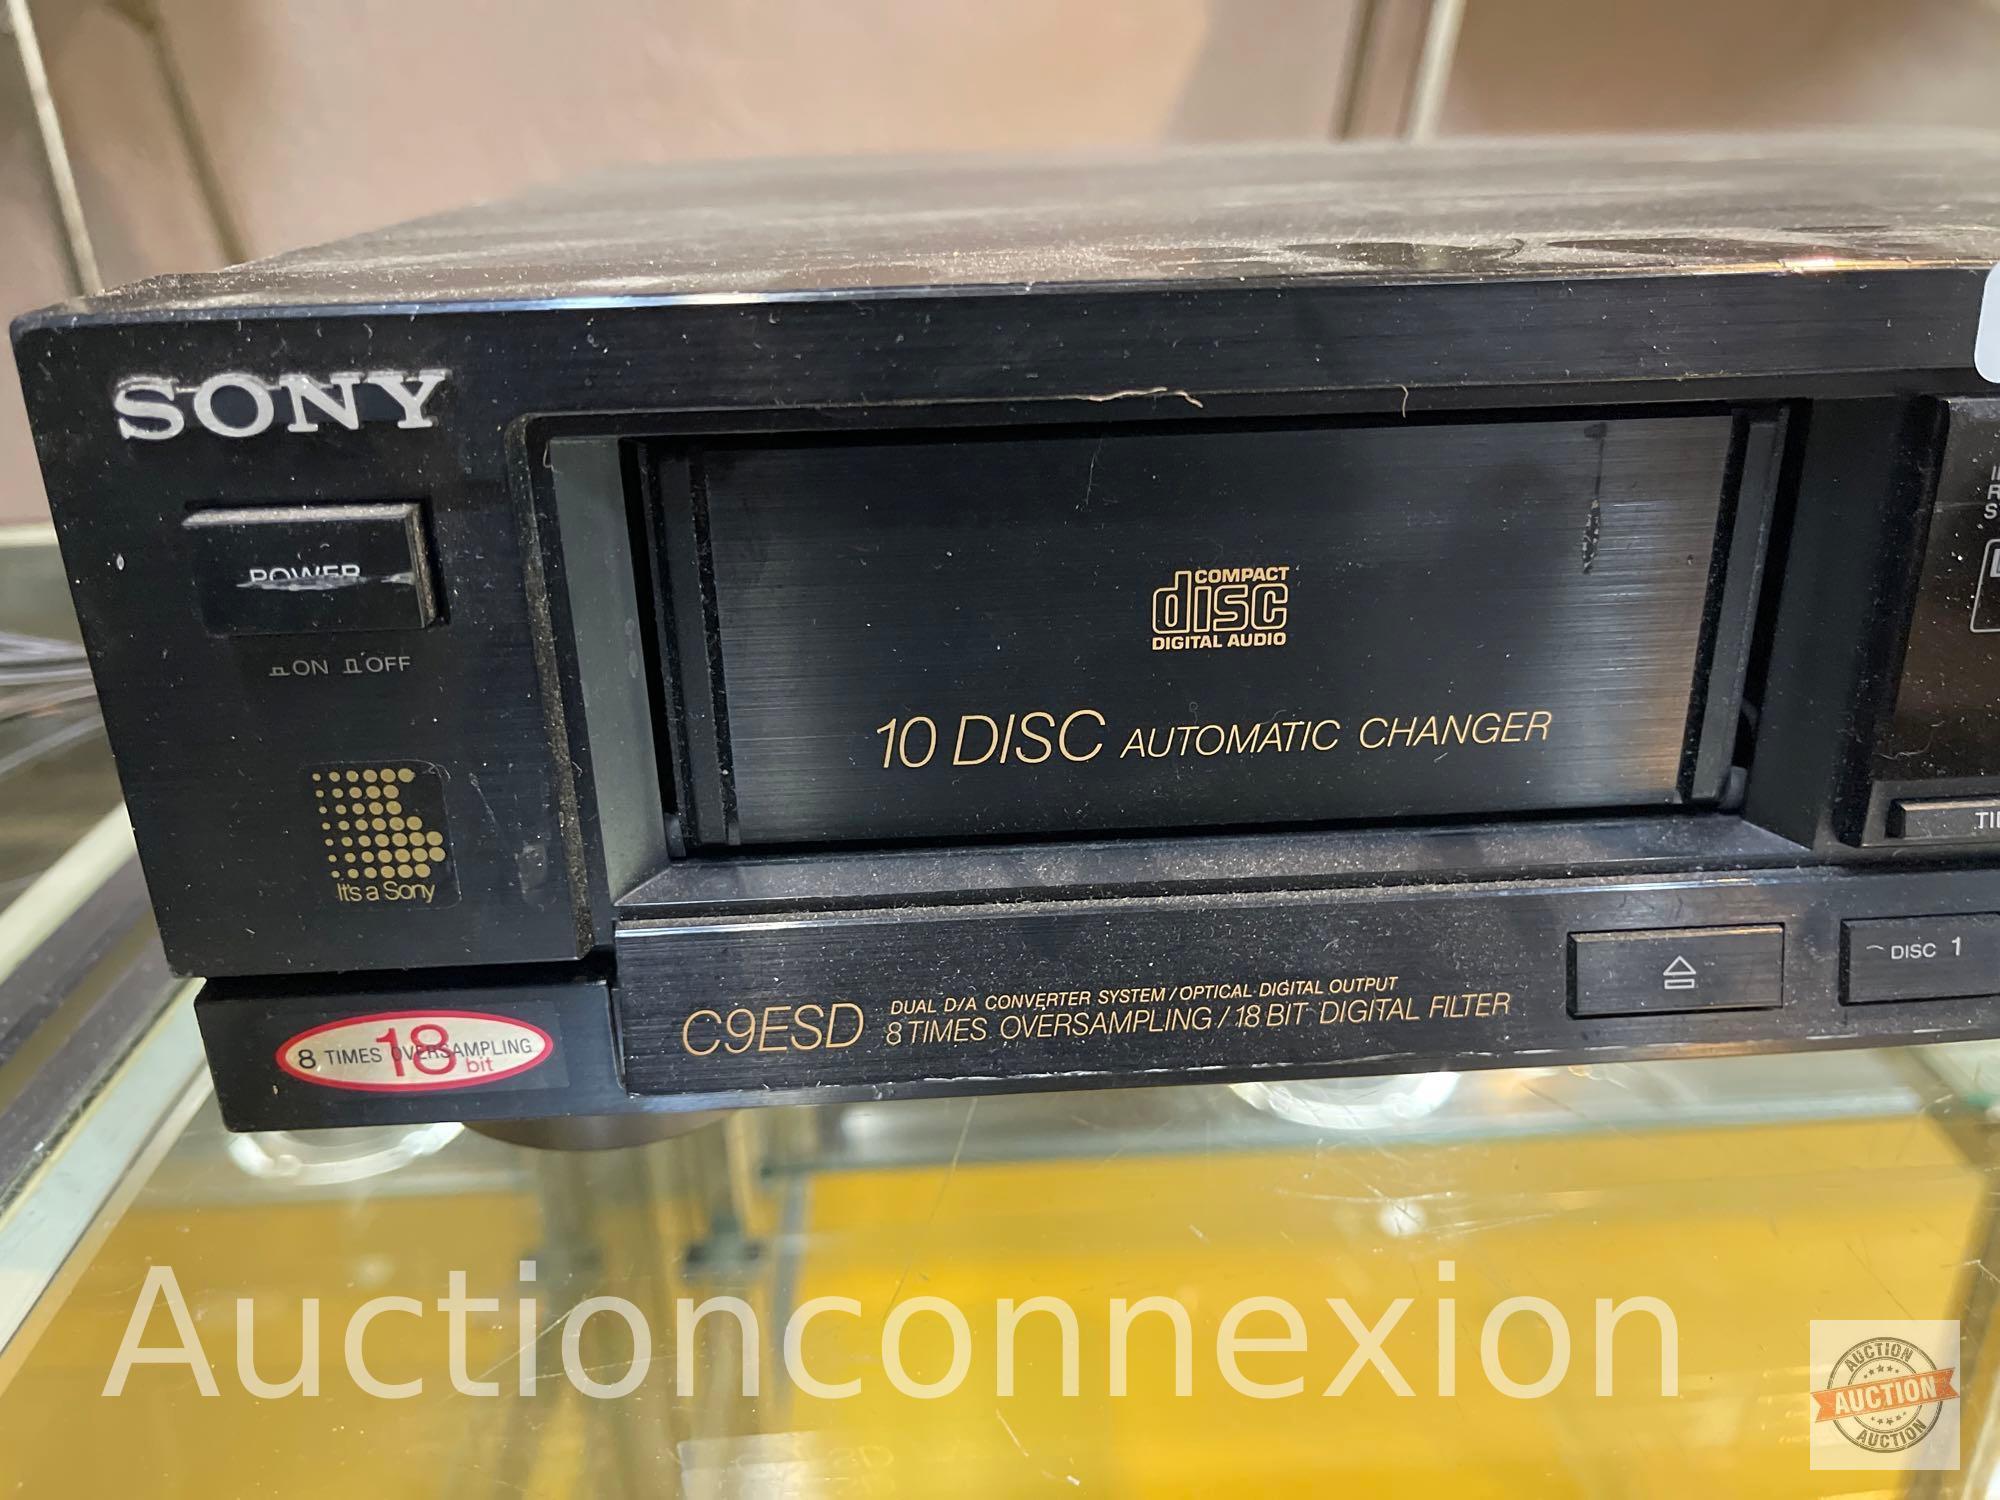 Electronics - Sony Compact Disc Player, 10 Disc automatic changer